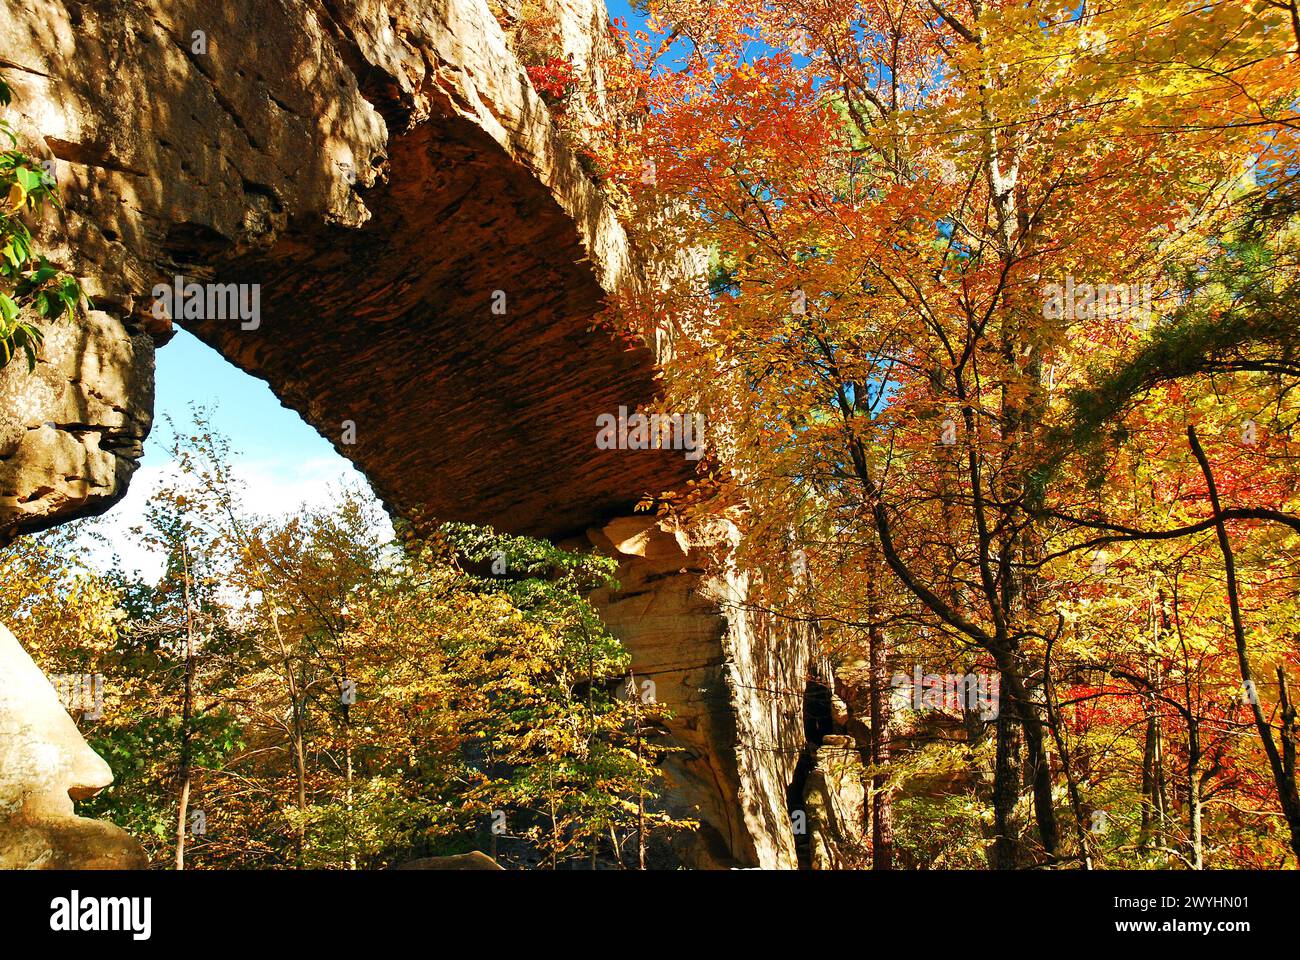 Autumn foliage surrounds a Natural stone Bridge at the Natural Bridge State Park in Kentucky on a sunny fall day Stock Photo